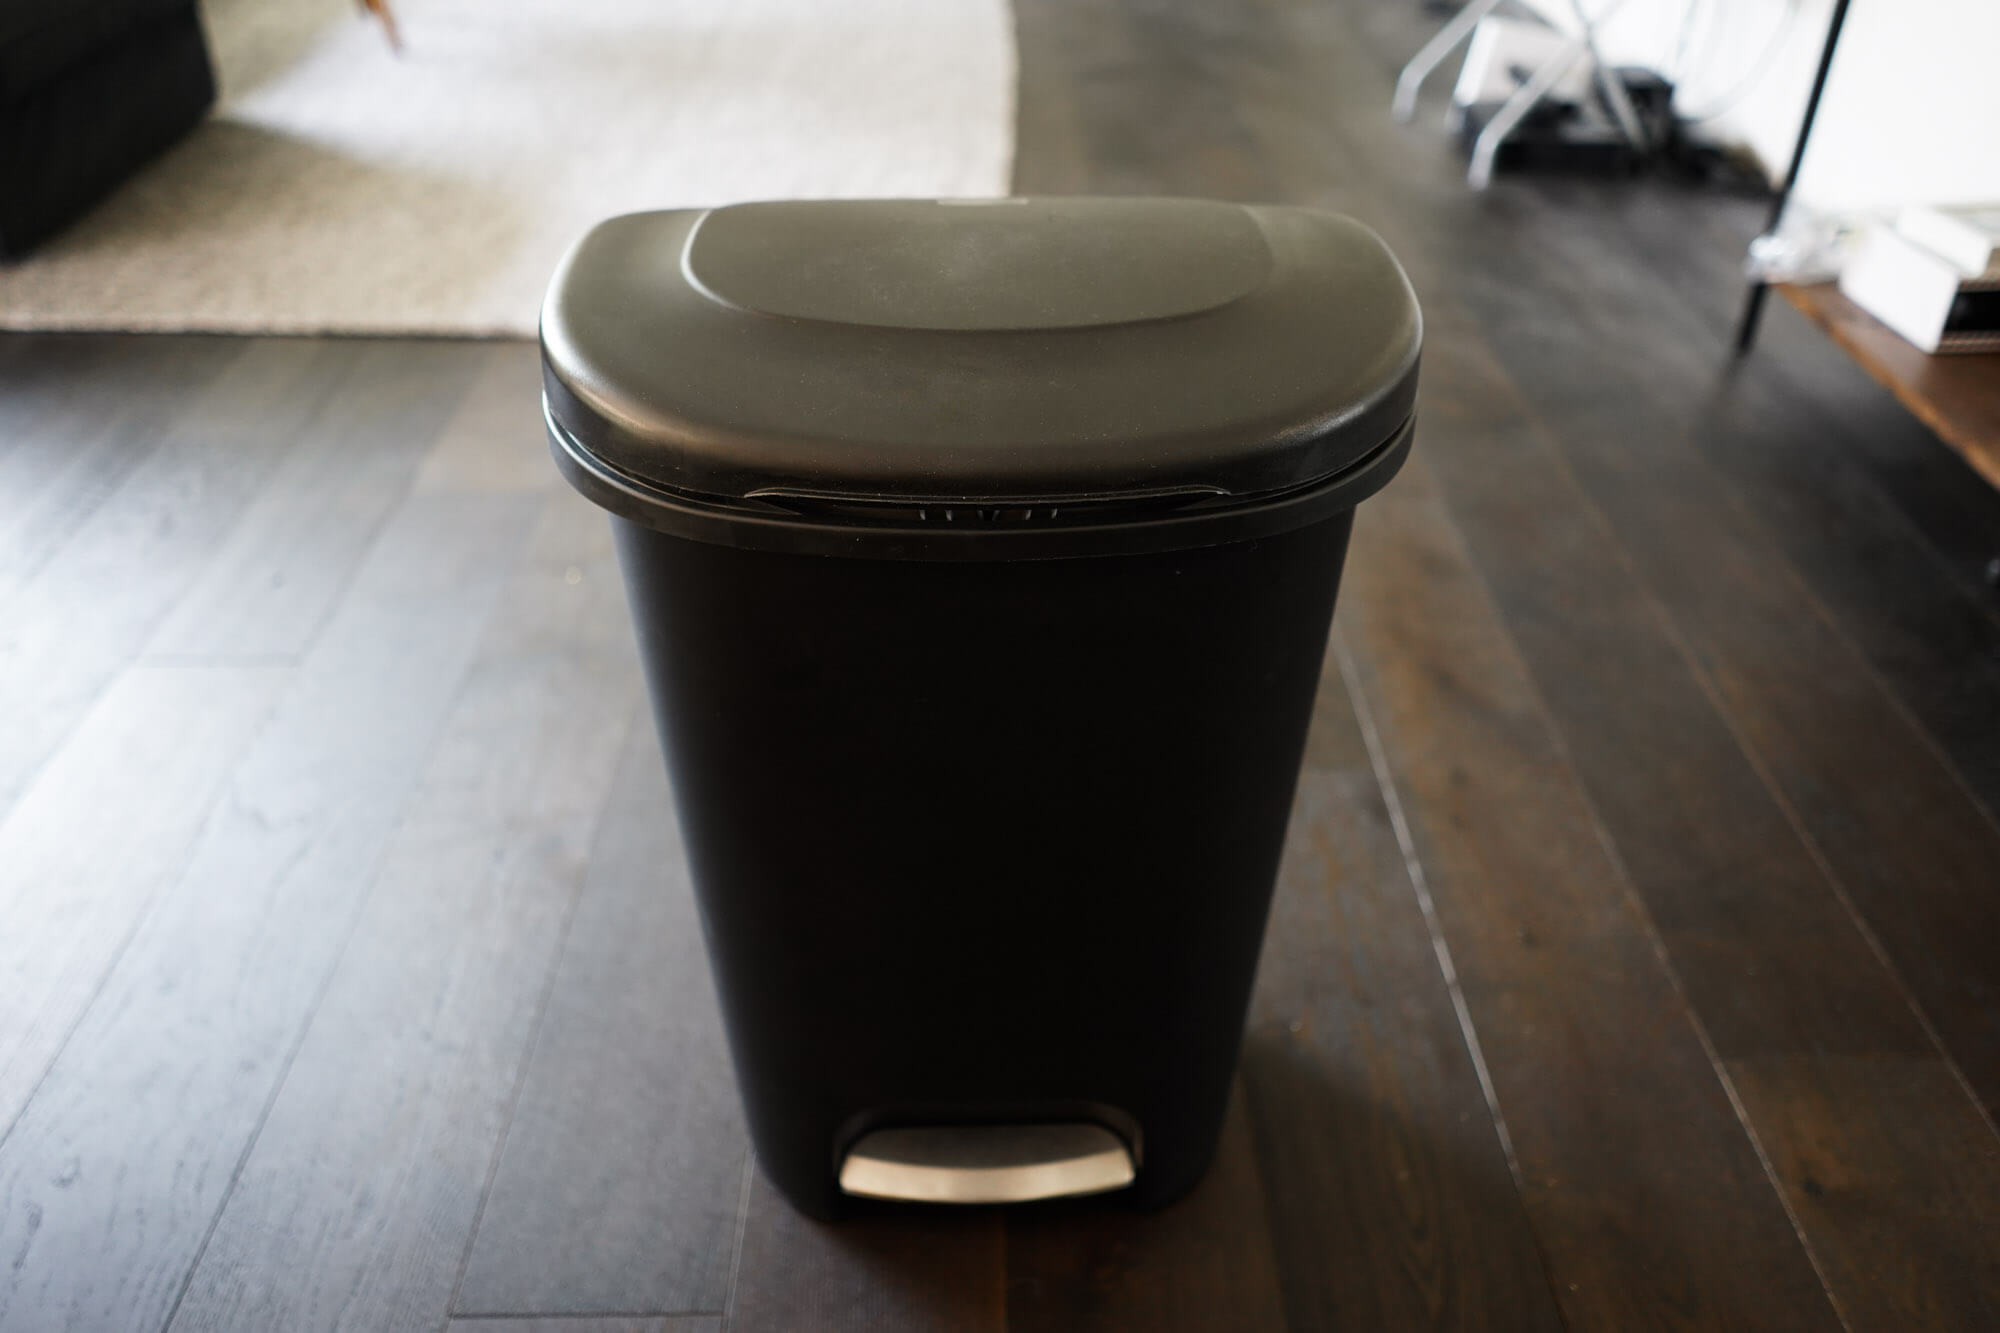  Glad GLD-74506 Stainless Steel Step Trash Can with